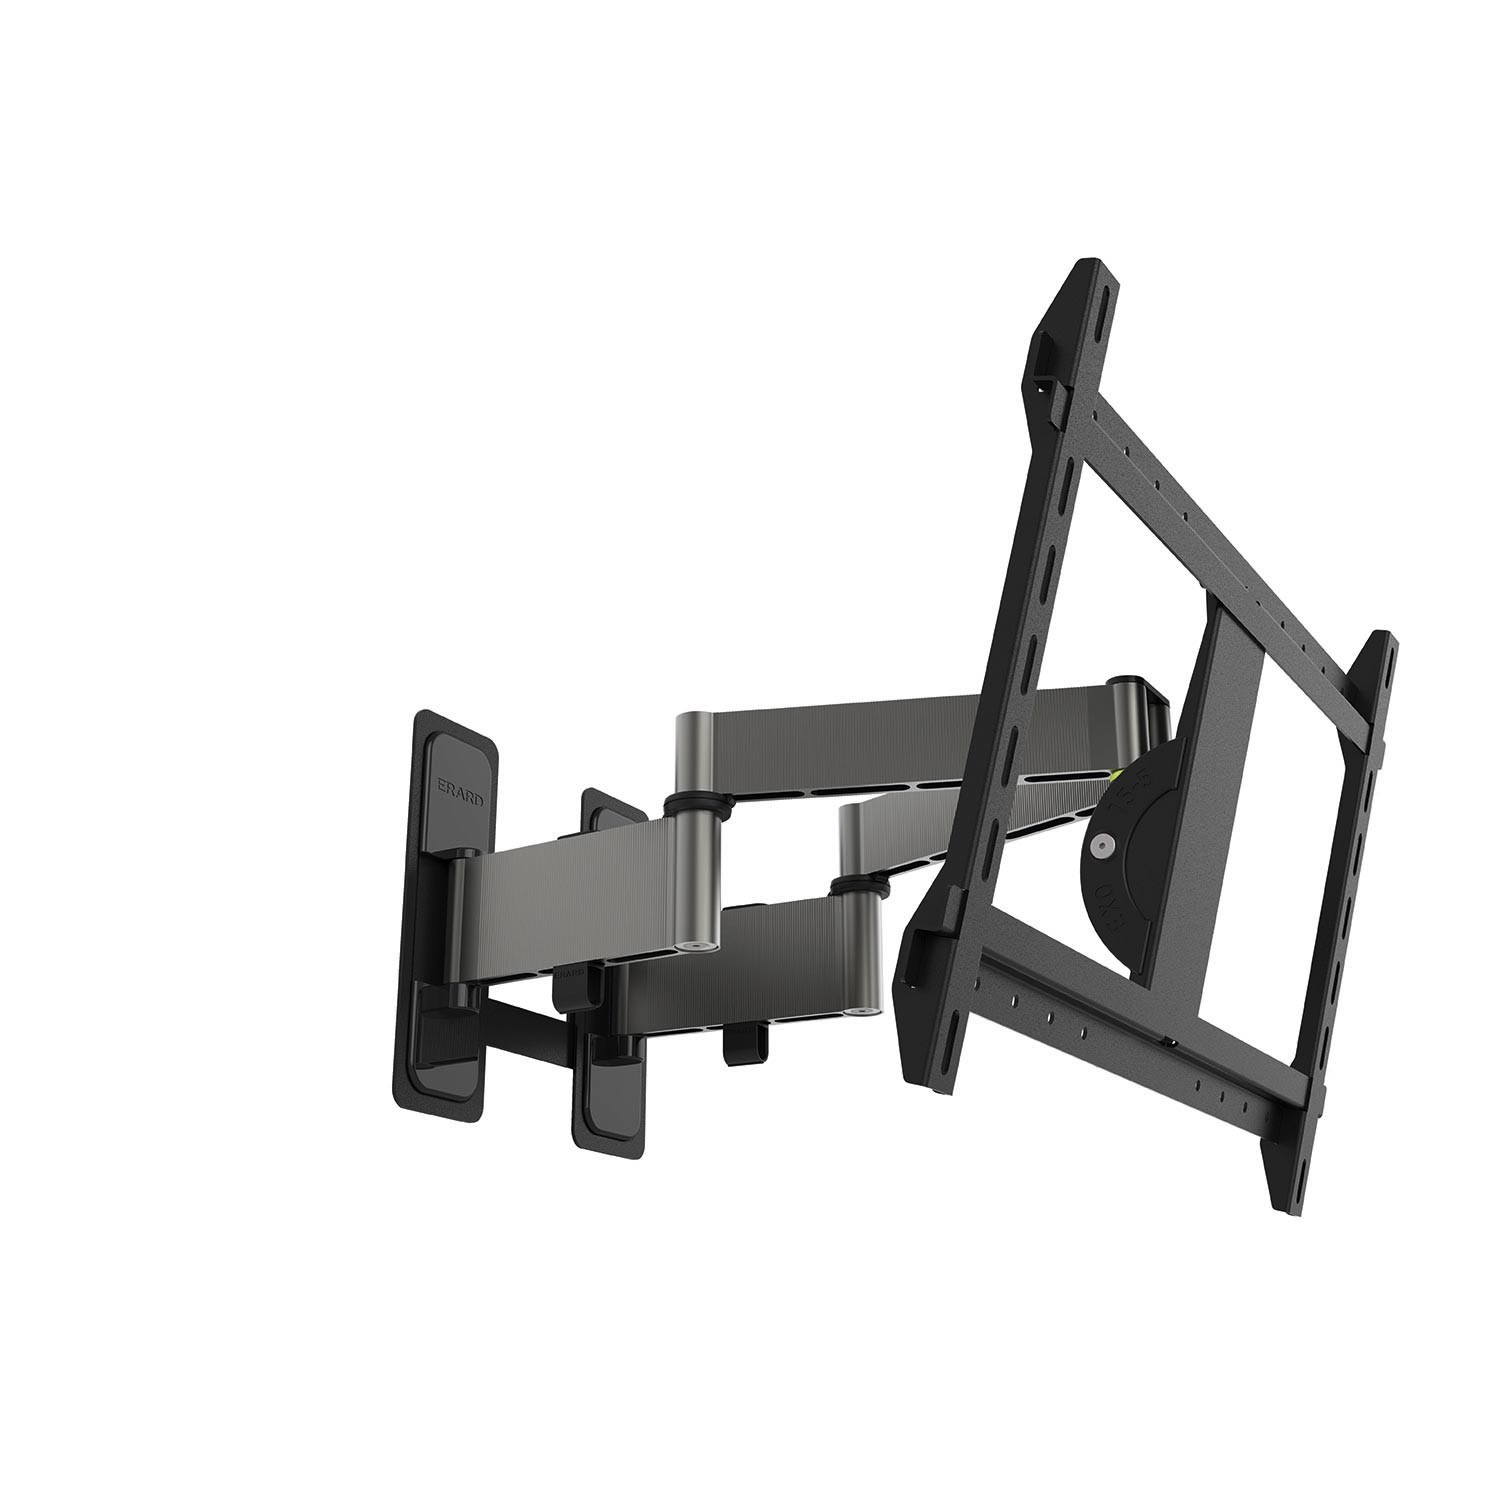 EXO XXLTW3 - support mural inclinable orientable